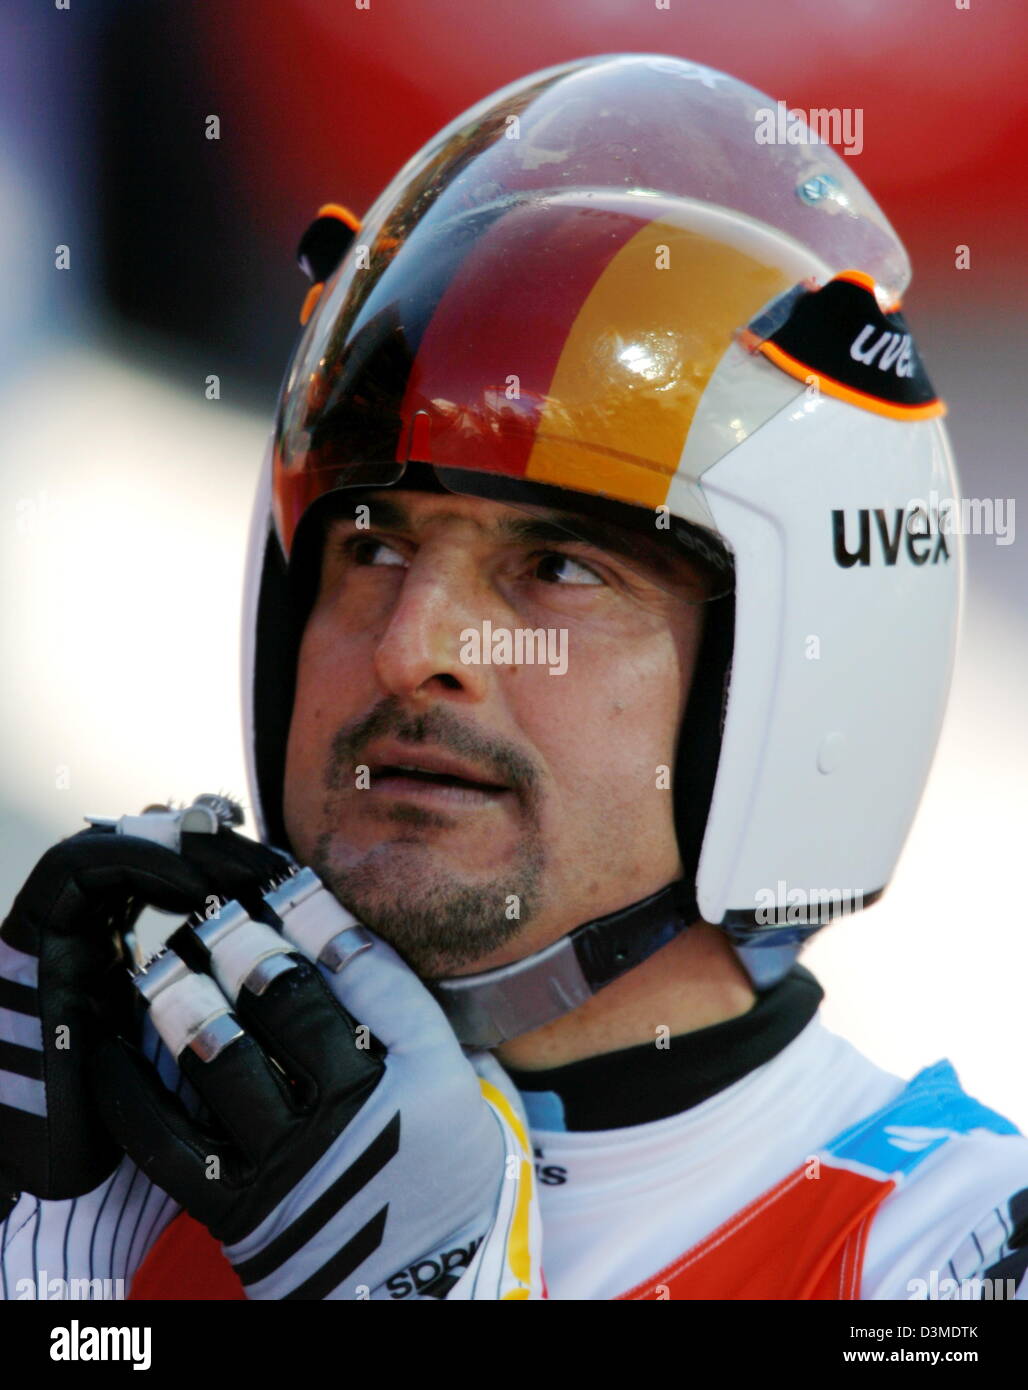 German triple gold medal winner Georg Hackl takes of his helmet after his first run at the Olympic luge track in Cesana Pariol, Italy, Saturday 11 February 2006. Taking fifth place after two of four runs his sixth Olympic medal lies still within reach. Italian gold favourite Armin Zoeggler clocked fastest time. Photo: Arne Dedert Stock Photo